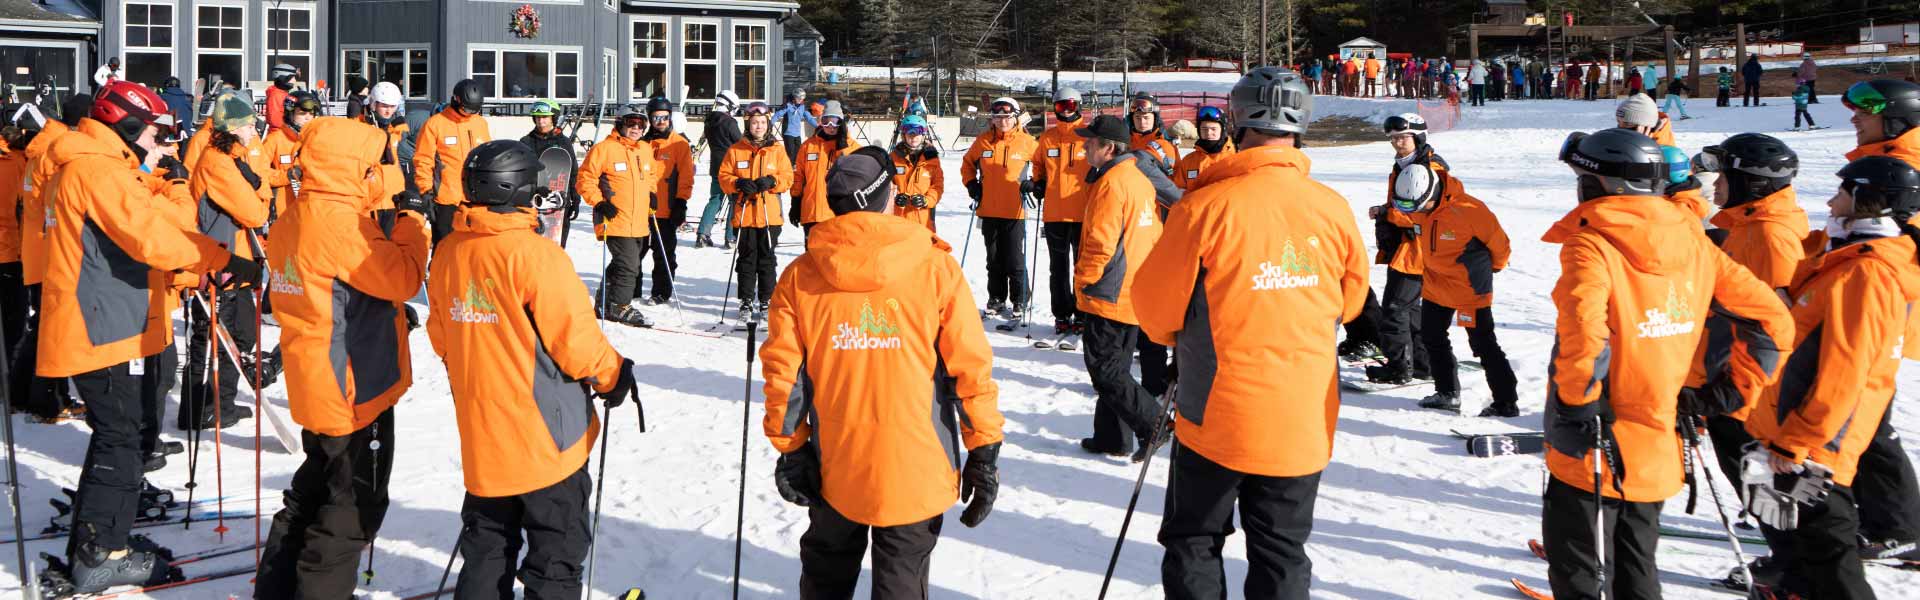 Group Photo of morning line-up of Ski School instructors